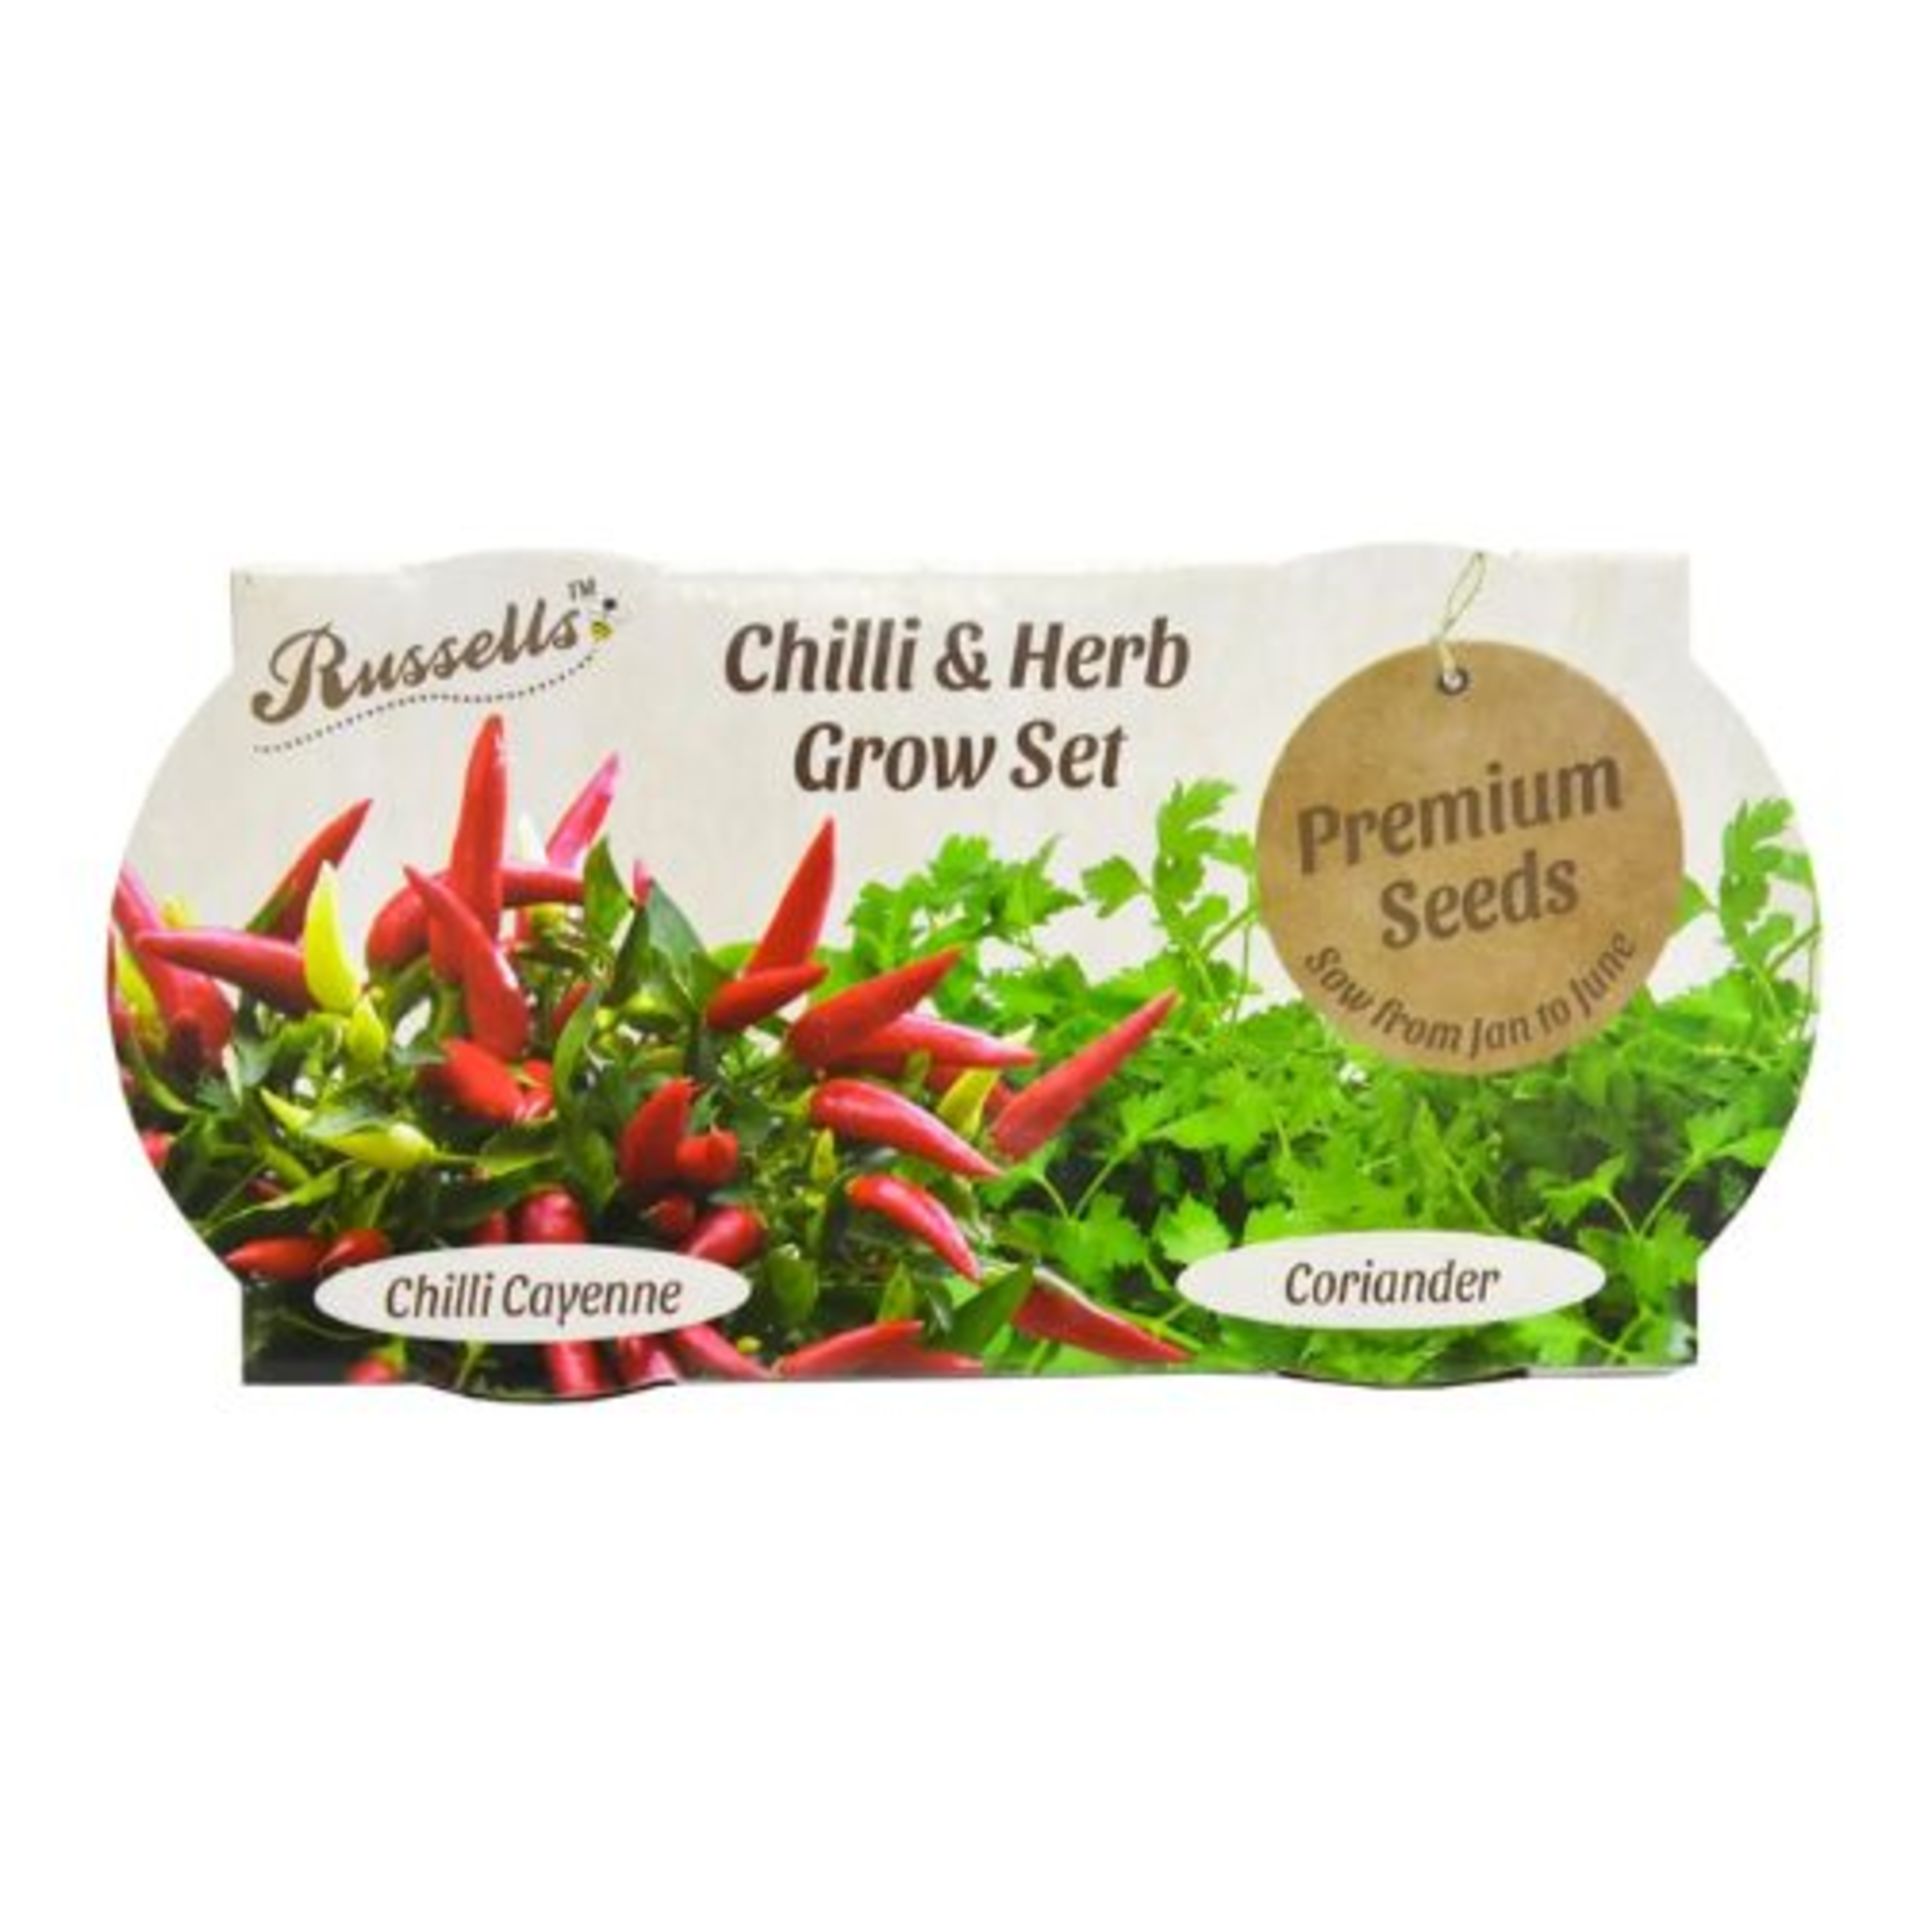 100 X NEW RUSSELLS TWIN TERRACOTTA GROW SETCHILLI & HERB 12S - Image 2 of 2